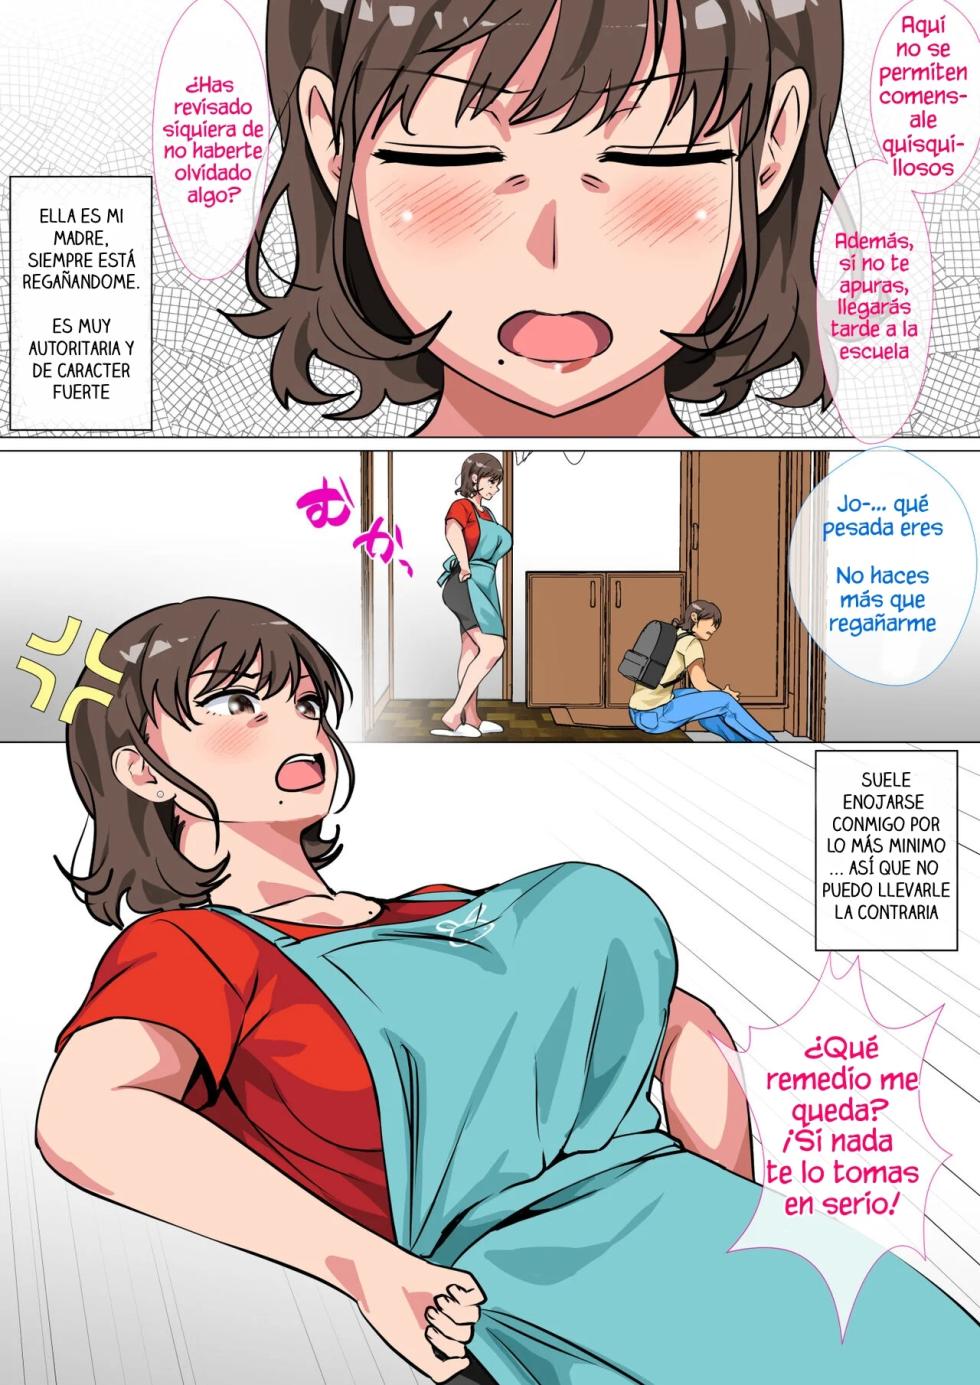 [Circle Spice] Ousama Game no Meirei de Haha to Sex Shita Hanashi | I Ordered My Mom to Have Sex with Me in King's Game [Spanish][PlipPlop] - Page 2